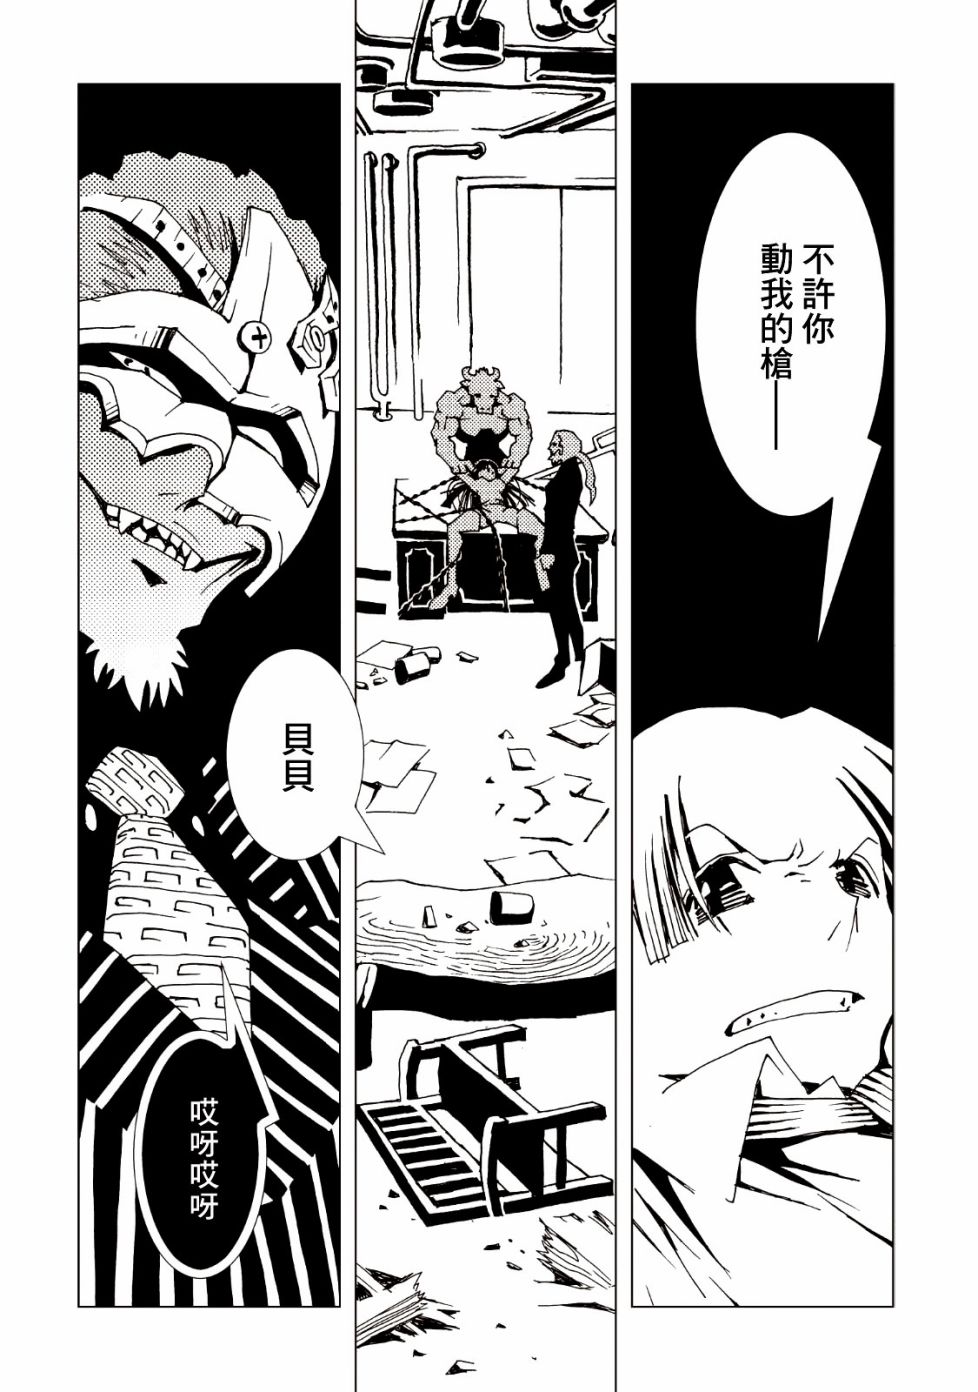 AREA51 - 第37話 - 3